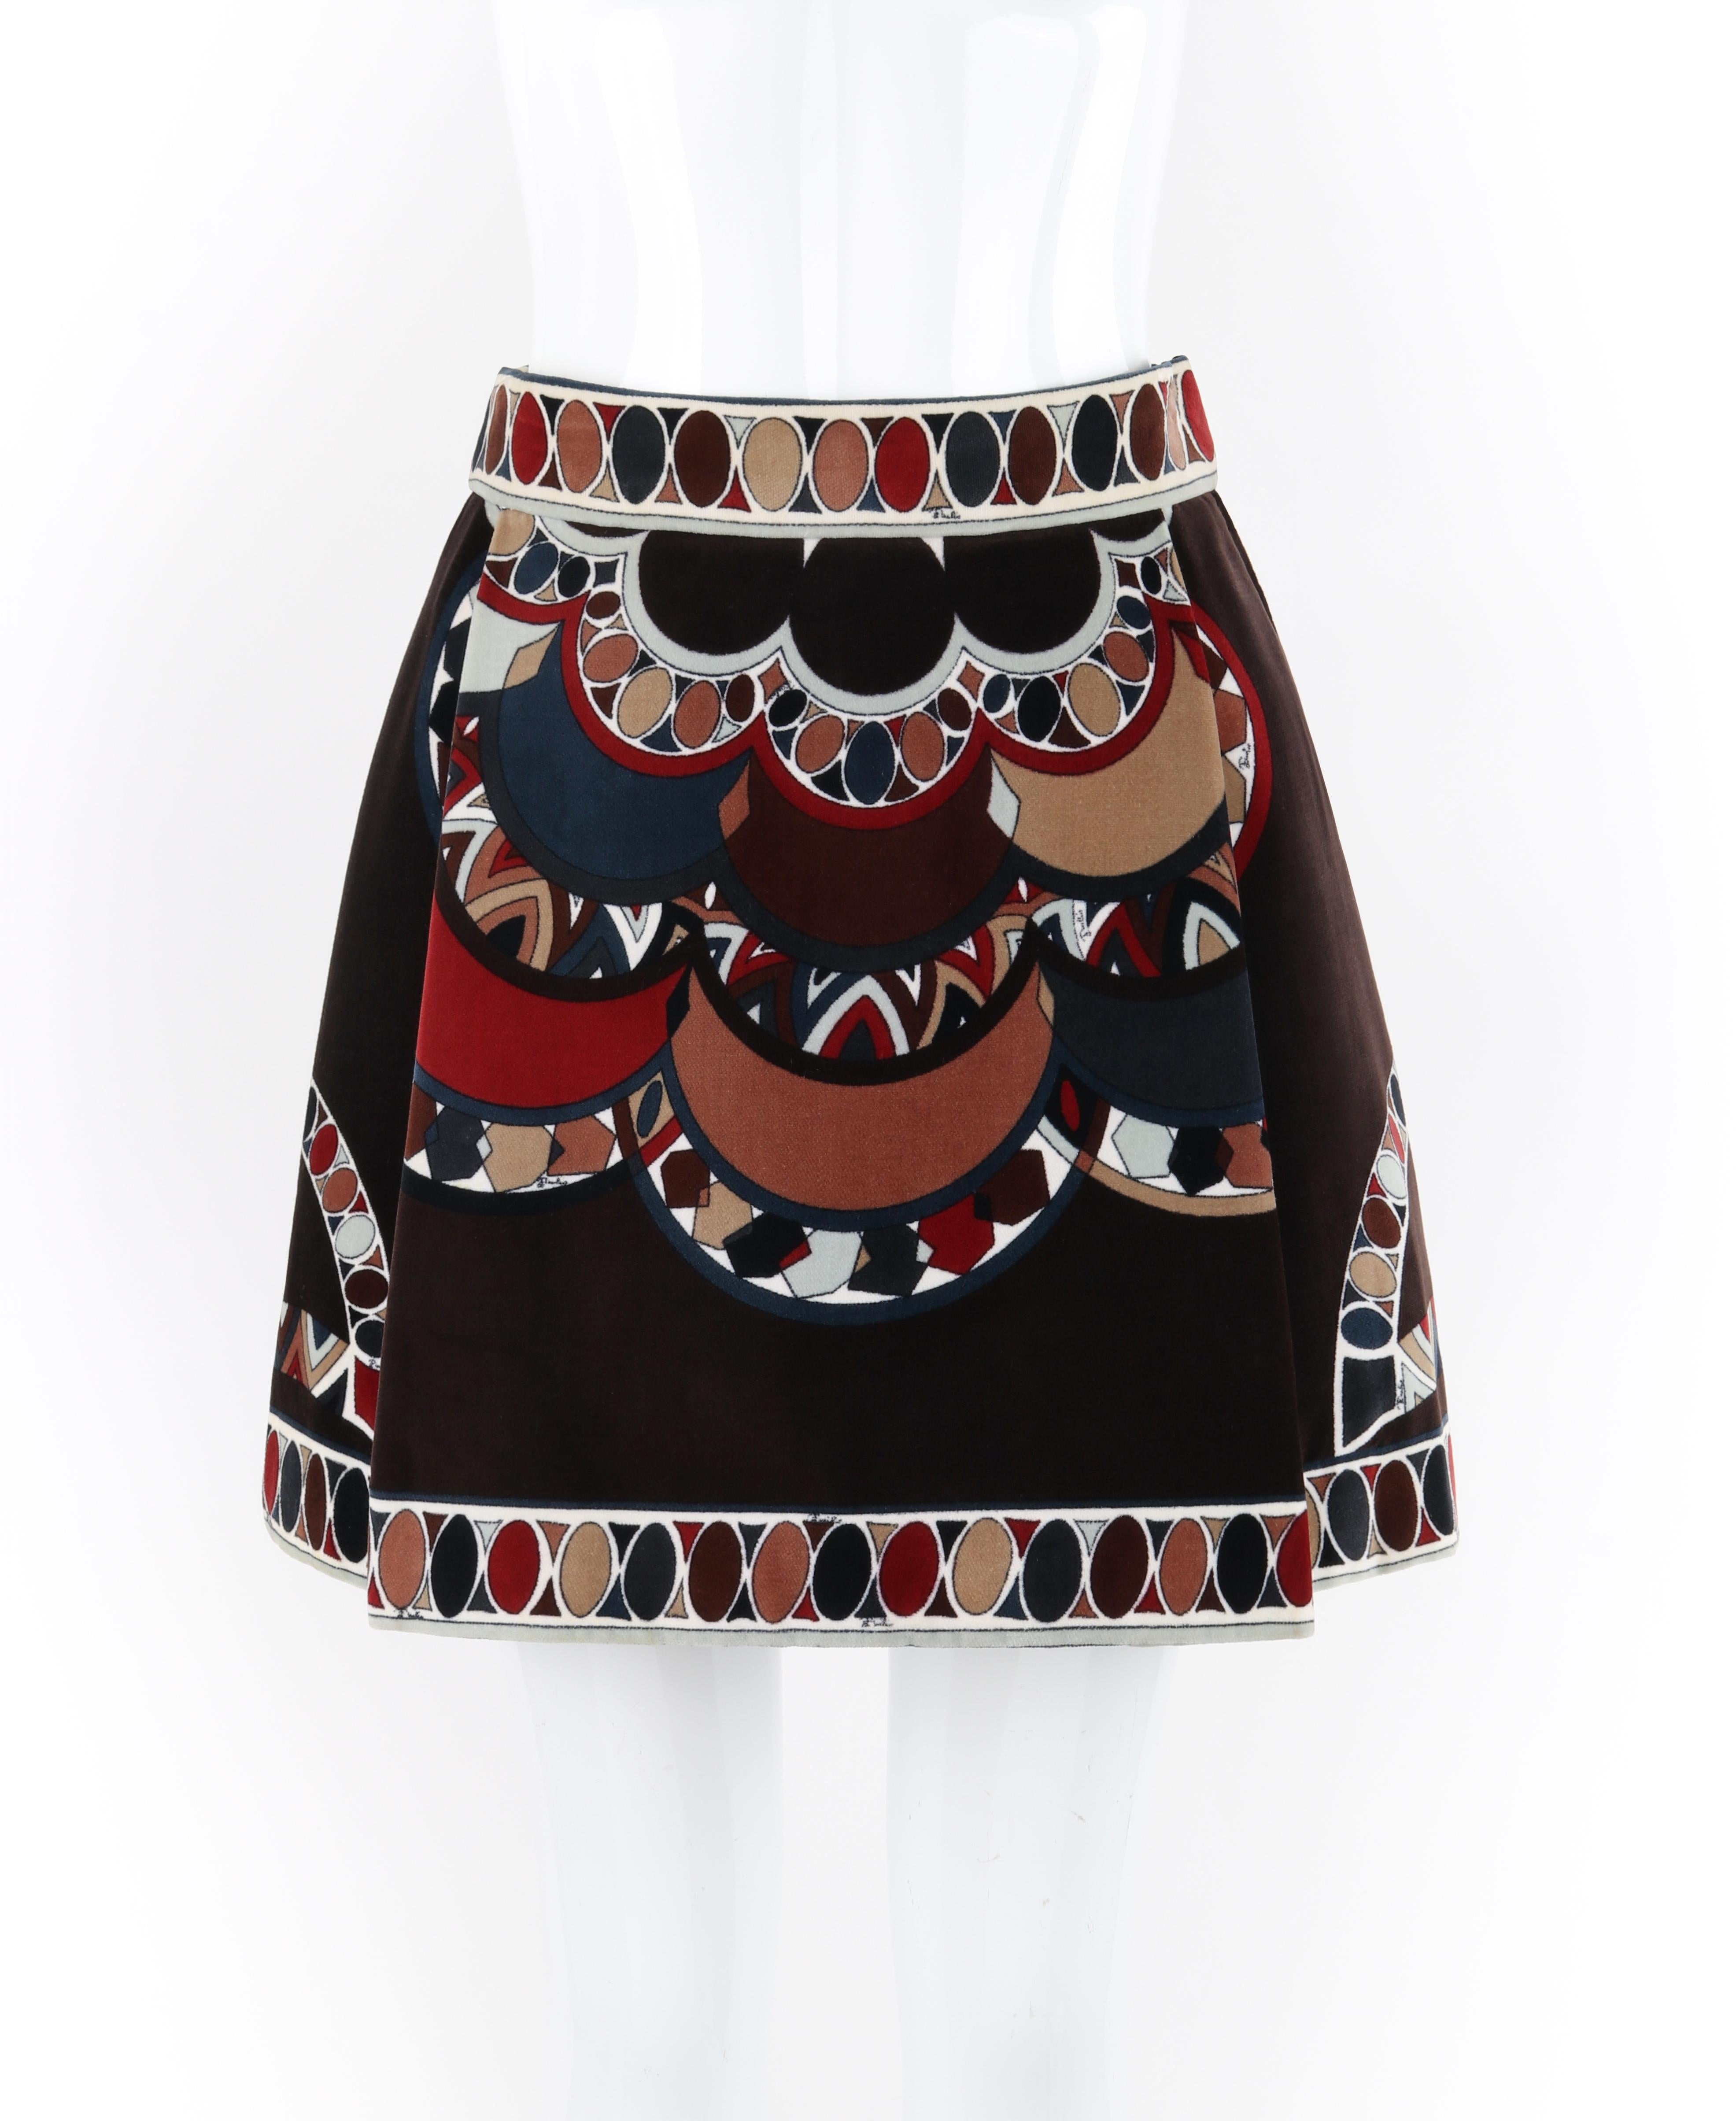 EMILIO PUCCI c.1969 Brown Multicolor Print A-Line Velvet Pleated Mini Skirt

Brand / Manufacturer: Emilio Pucci
Circa: 1969
Designer: Emilio Pucci 
Style: Mini Skirt
Color(s): Shades of brown, orange, blue, red, black, white
Lined: Yes
Marked Fabric